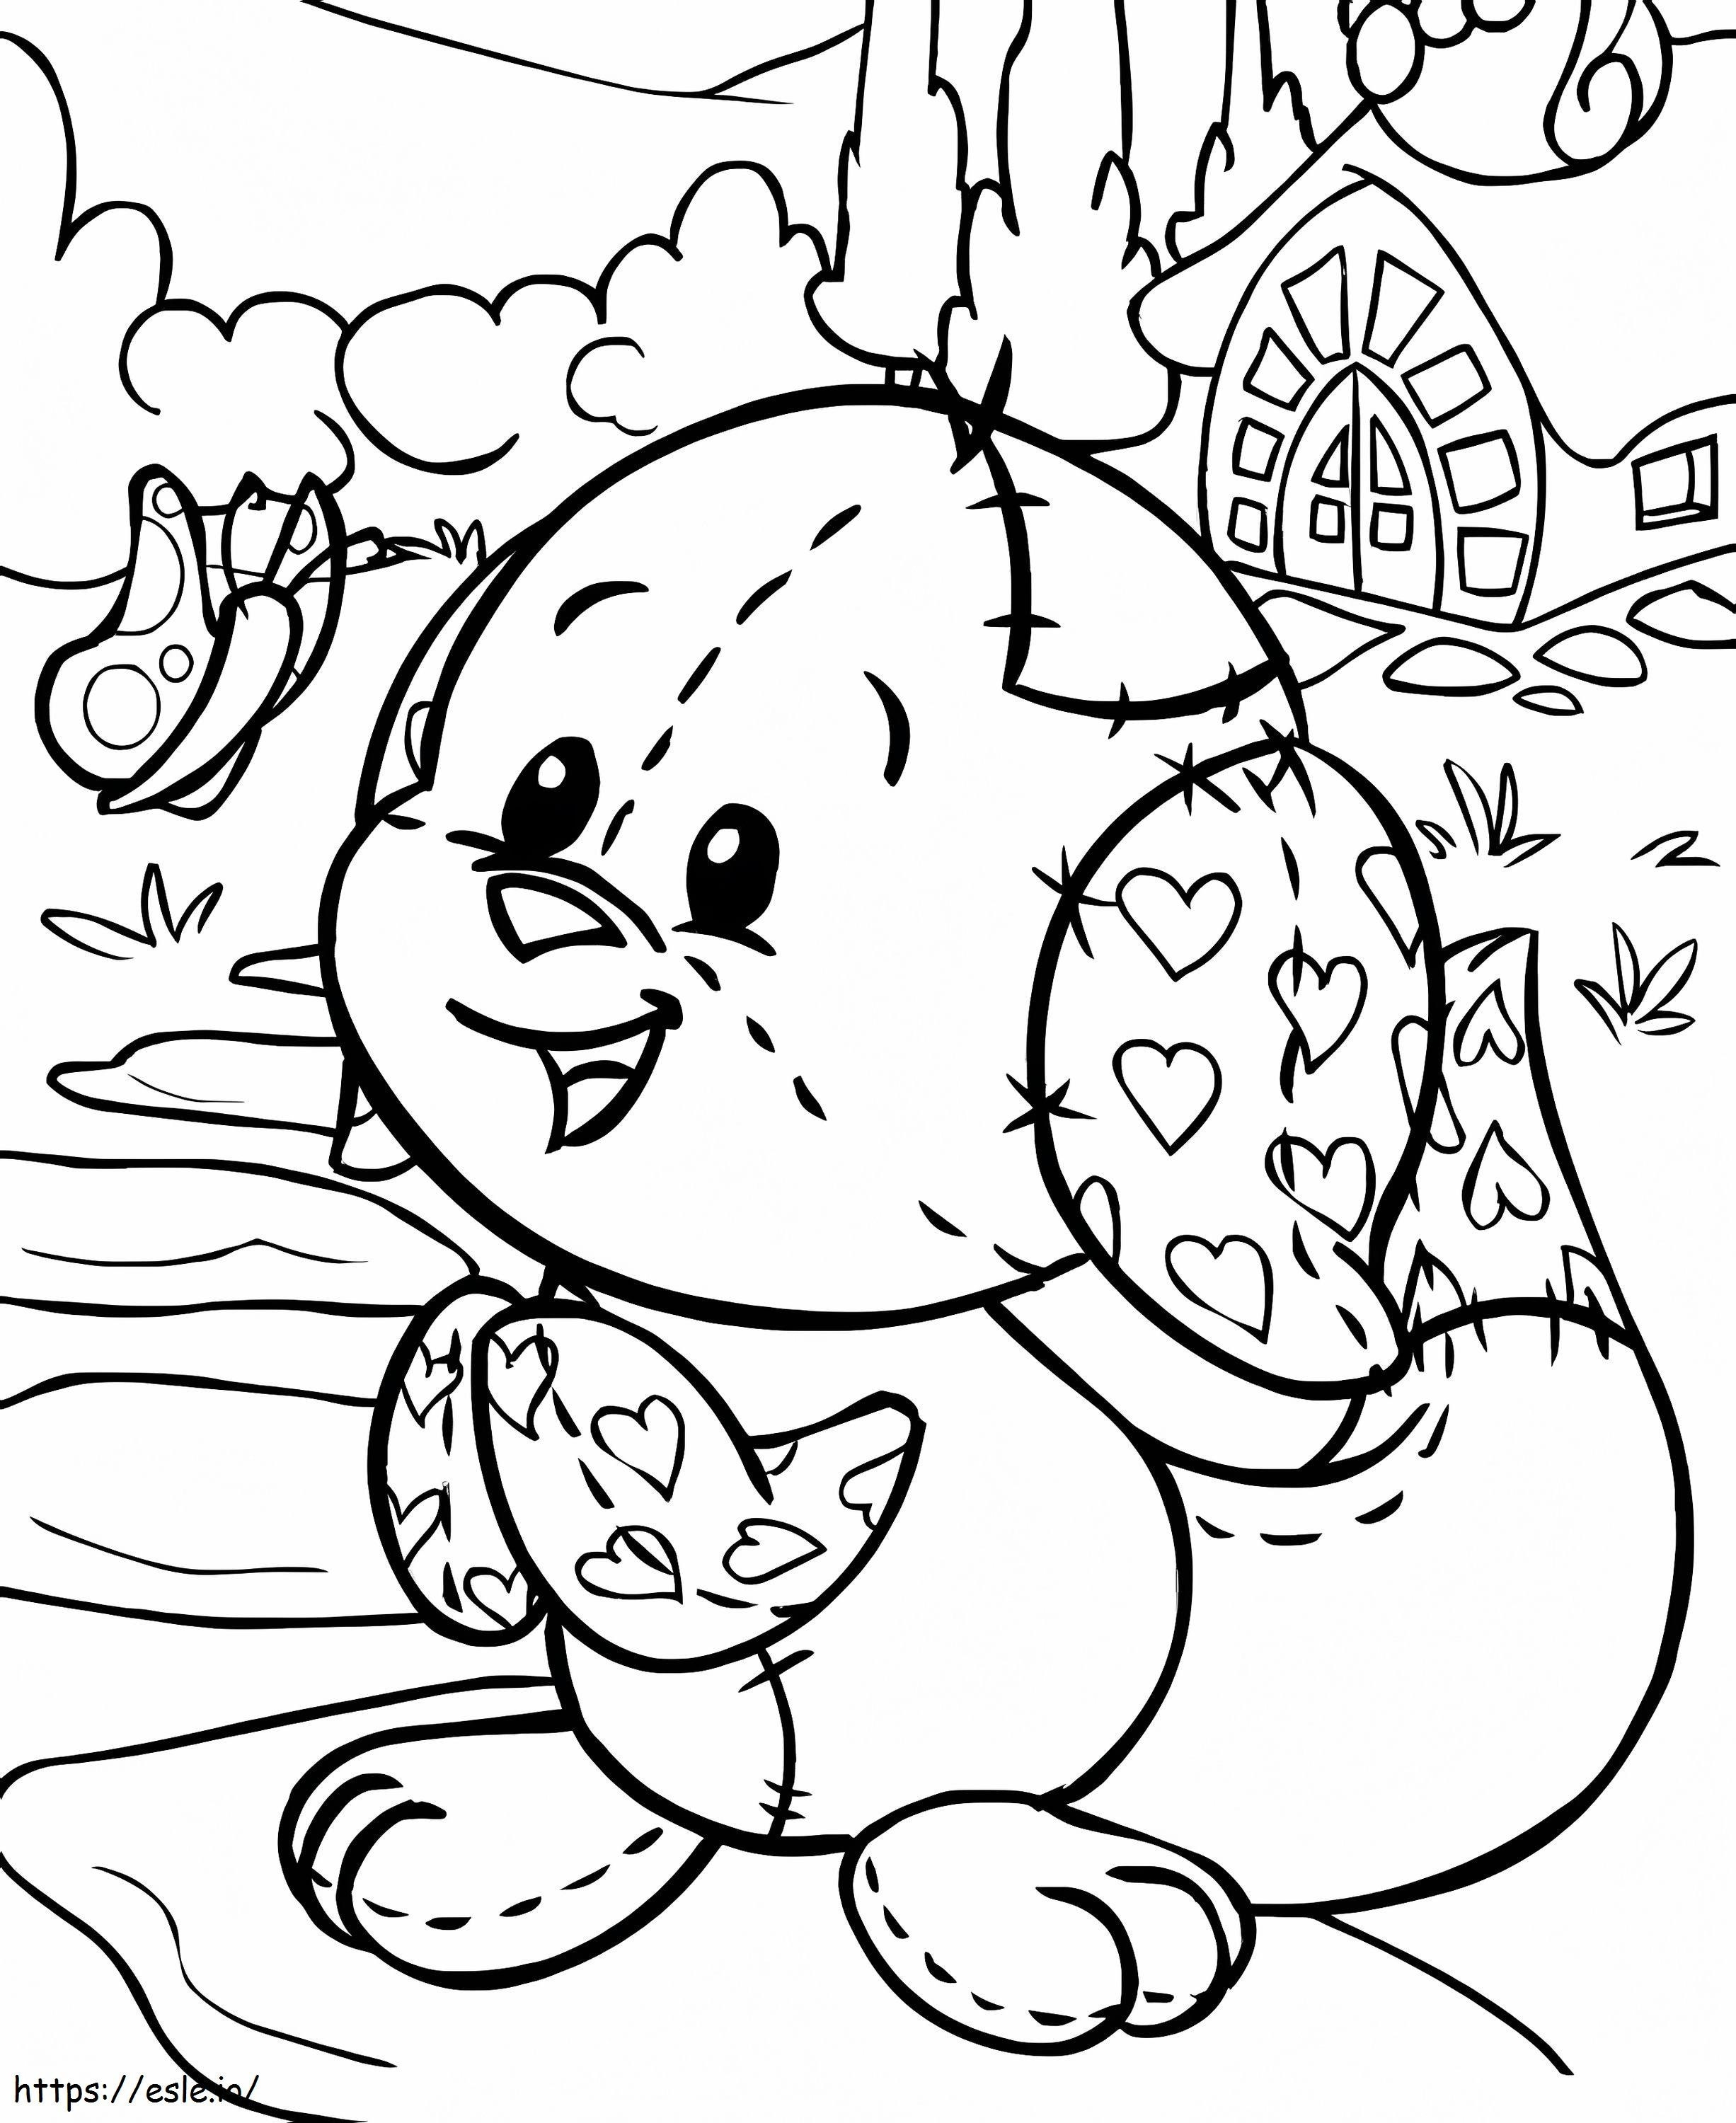 Cute Neopets coloring page